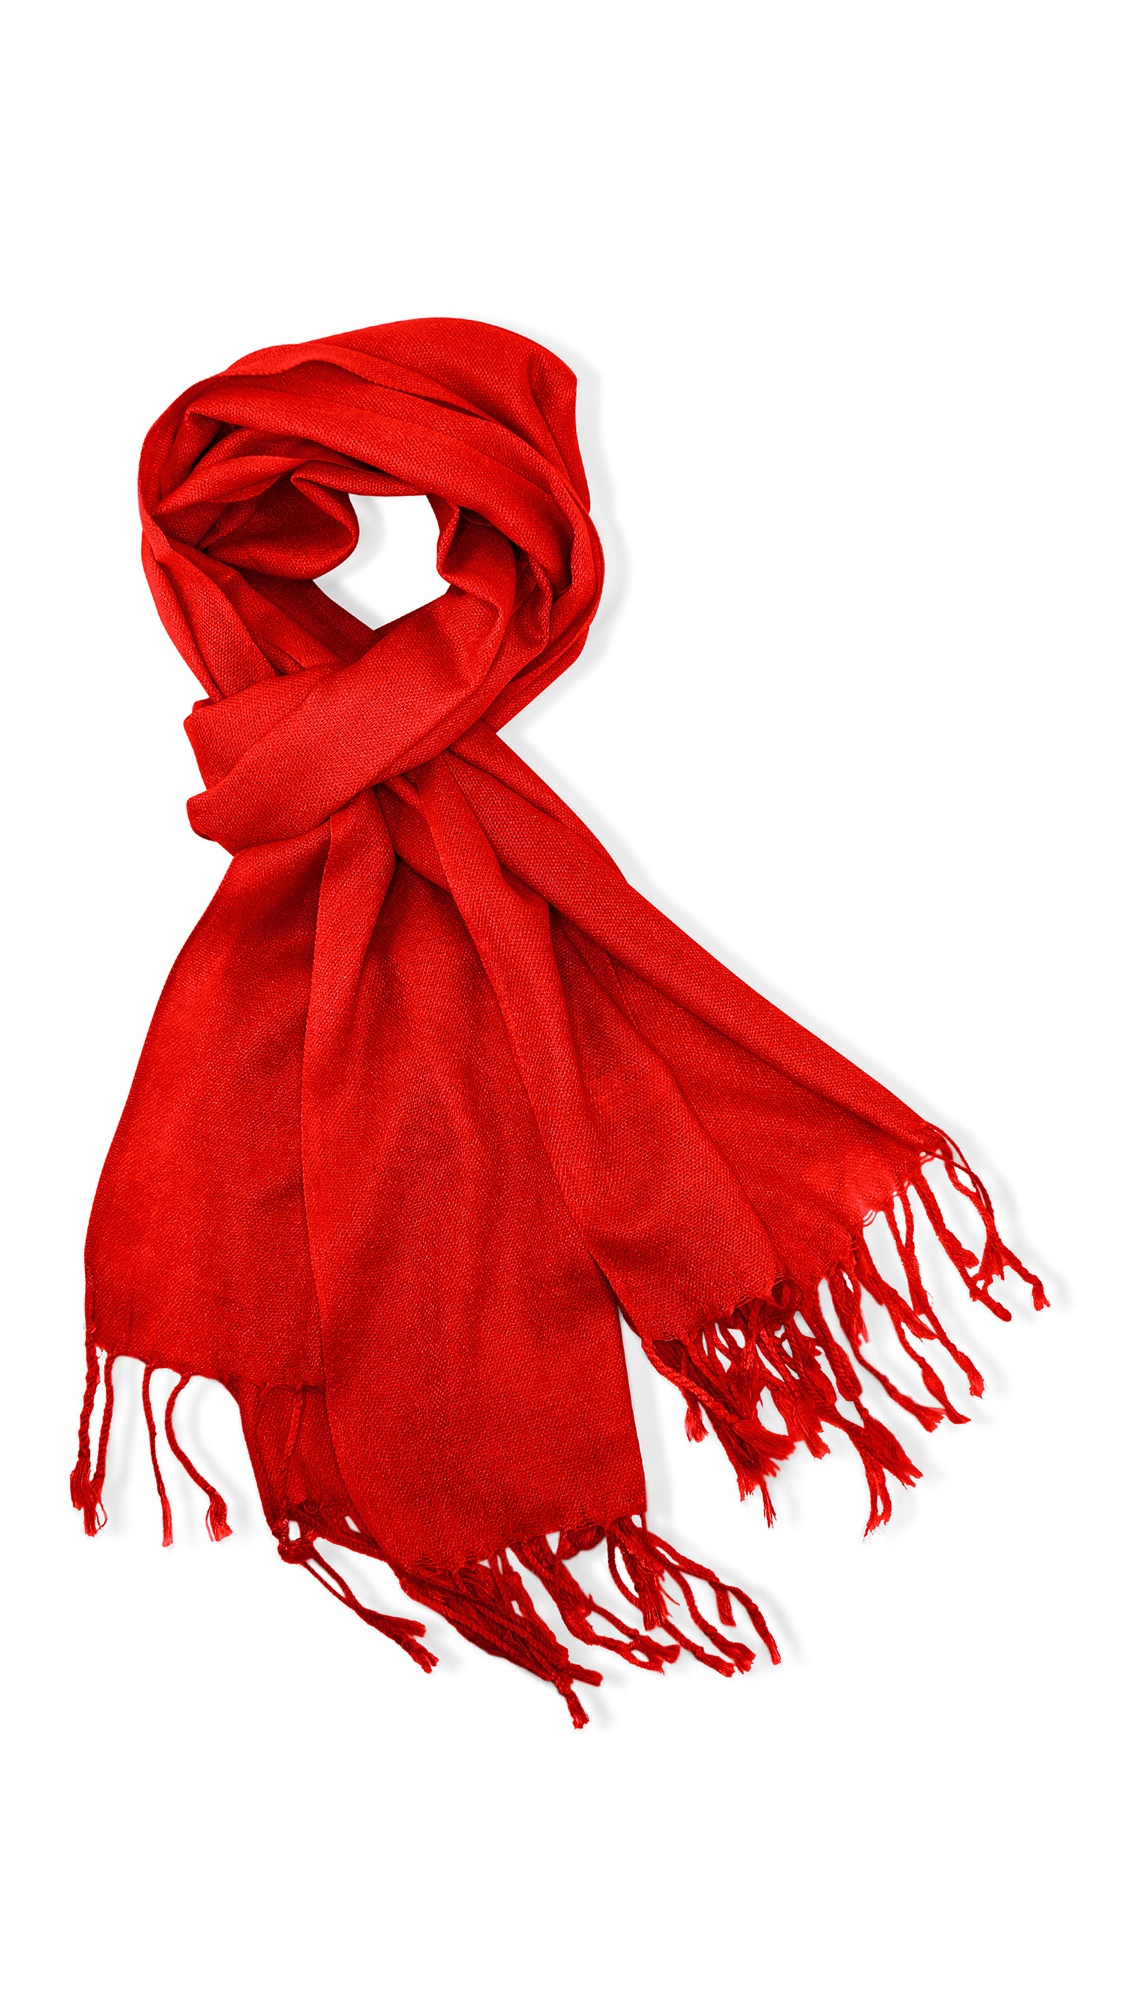 Fashion Women's Scarf Lightweight Long Scarfs Luxury Lady Classic Range Pashmina Silk Solid colors Wraps Shawl Stole Soft Warm Scarves For Women - image 3 of 5